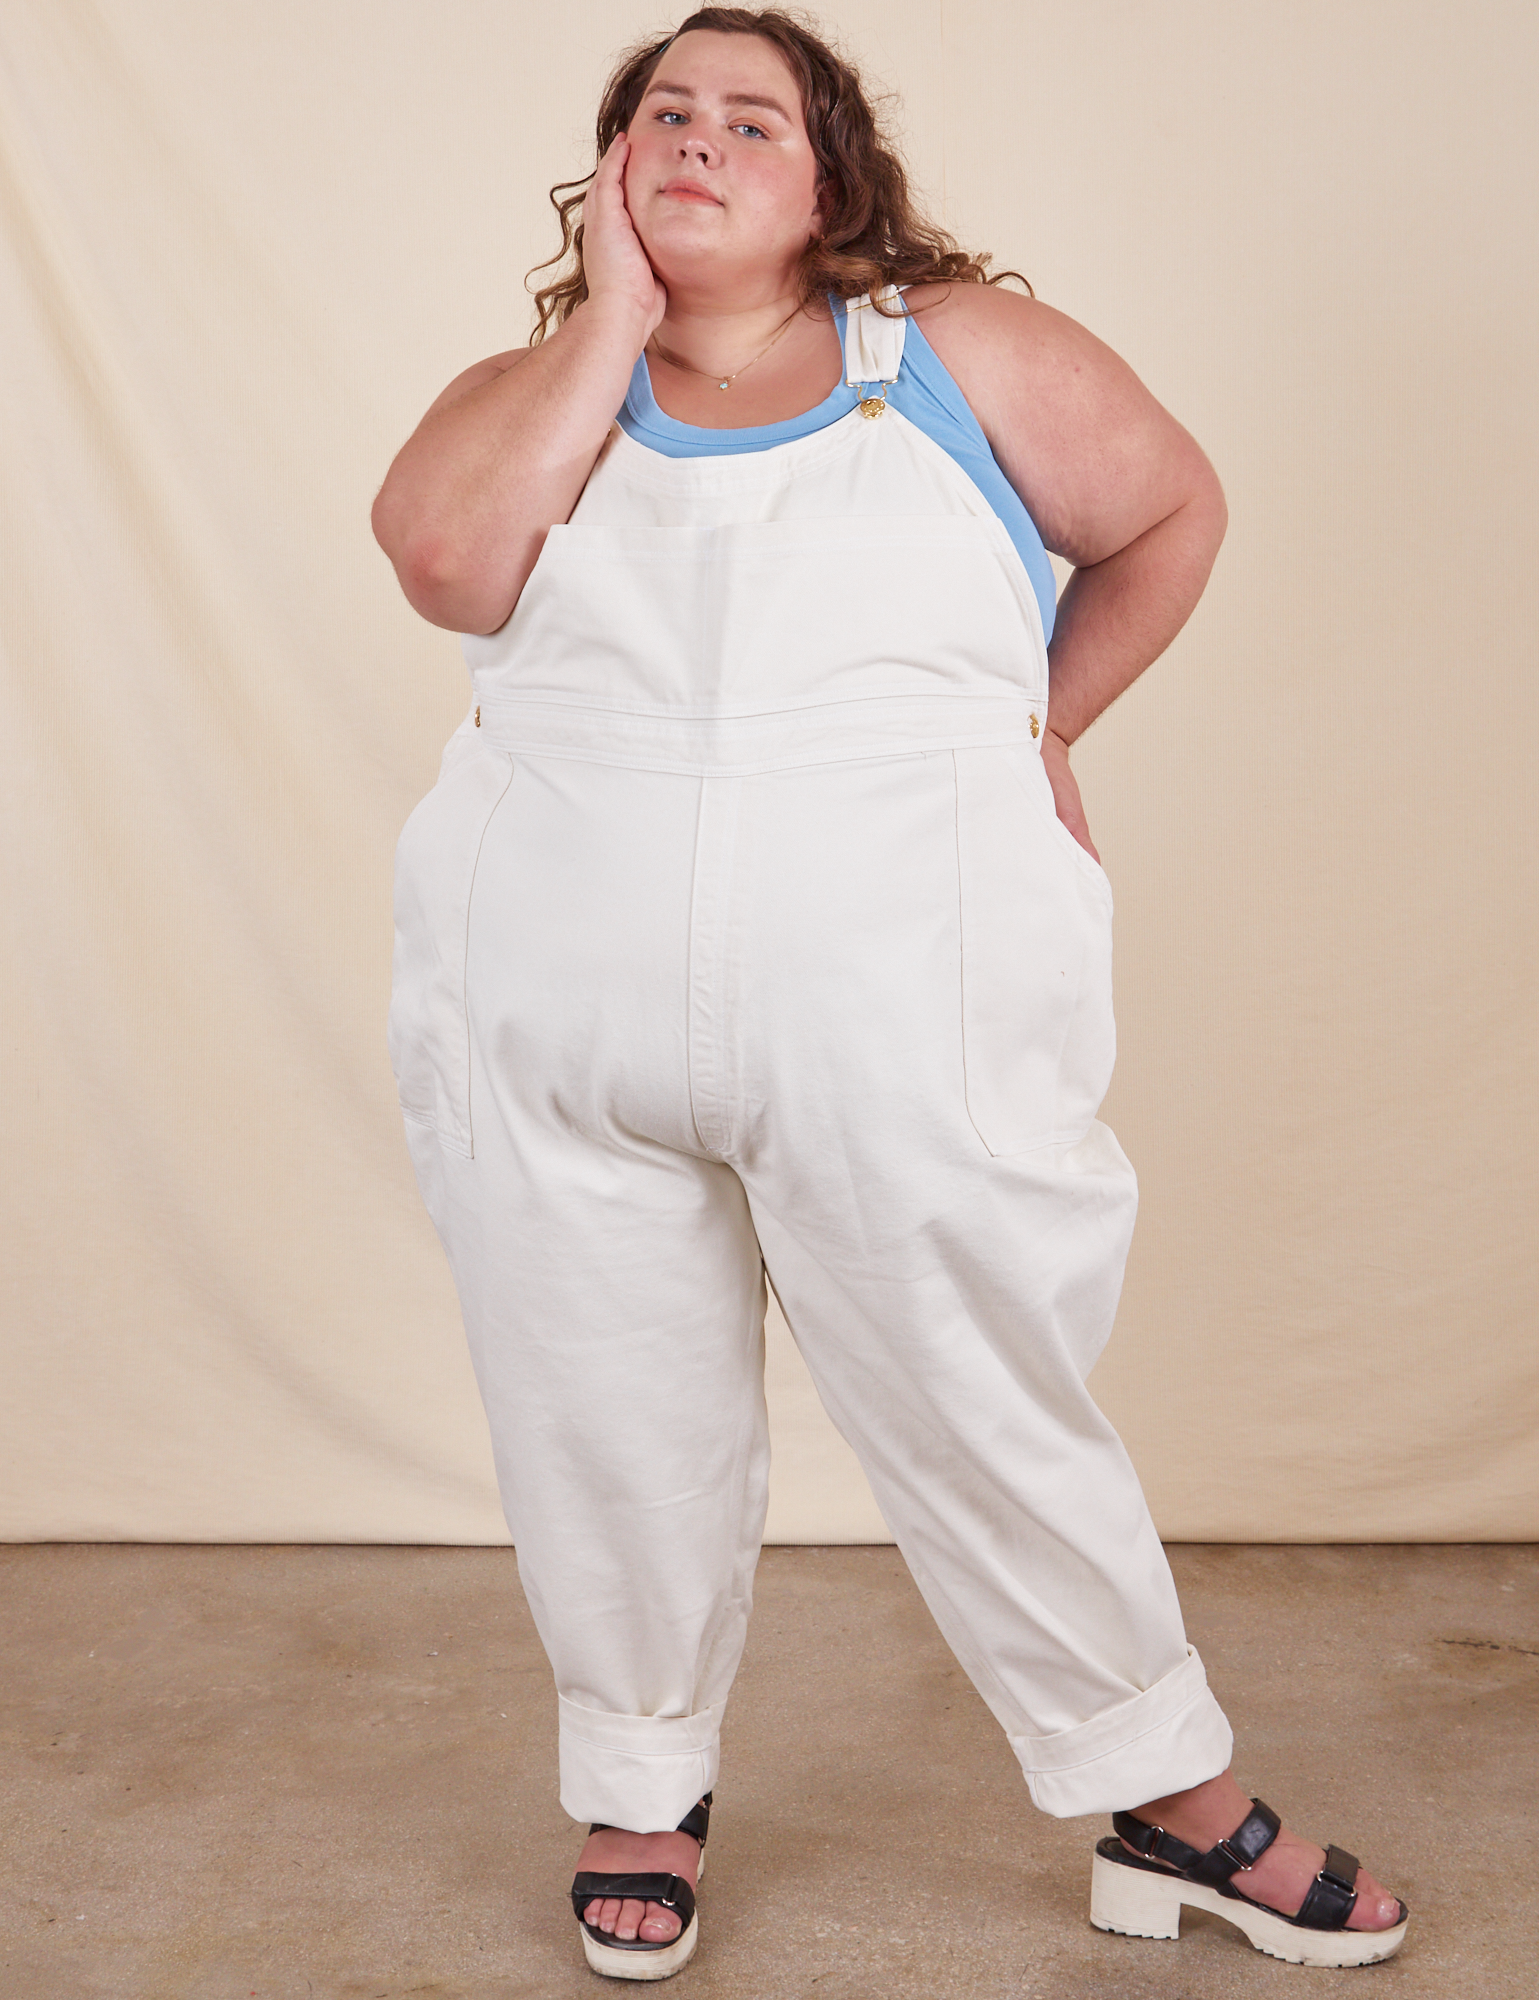 Mara is 5&#39;5&quot; and wearing 4XL Original Overalls in Vintage Tee Off-White